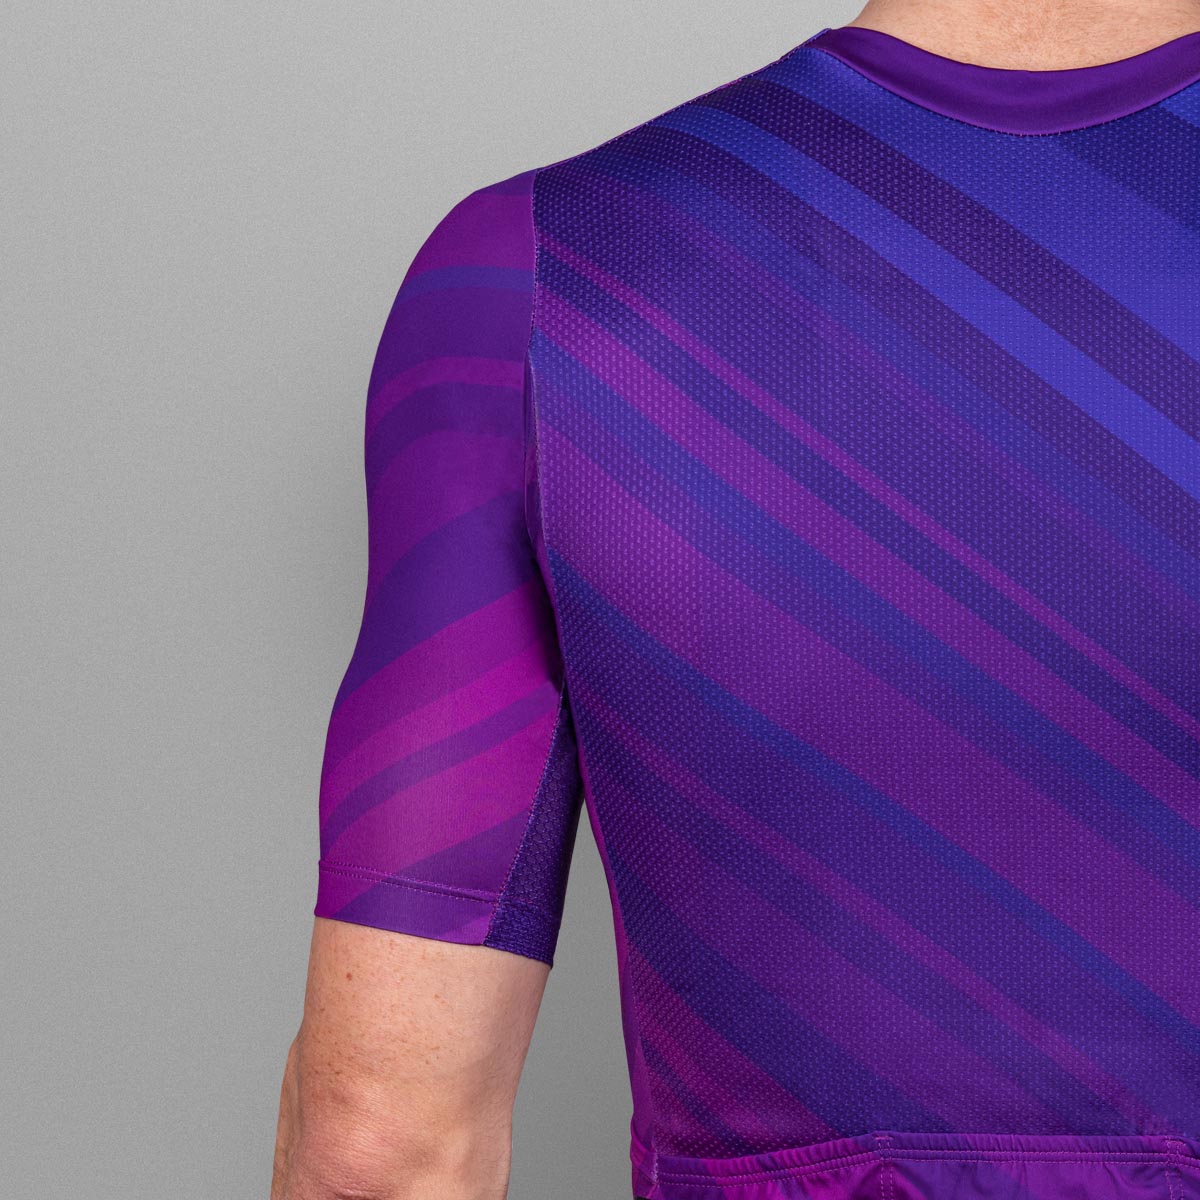 Luxa cycling jersey in pastel purple with contrasting stripes in shades of violet